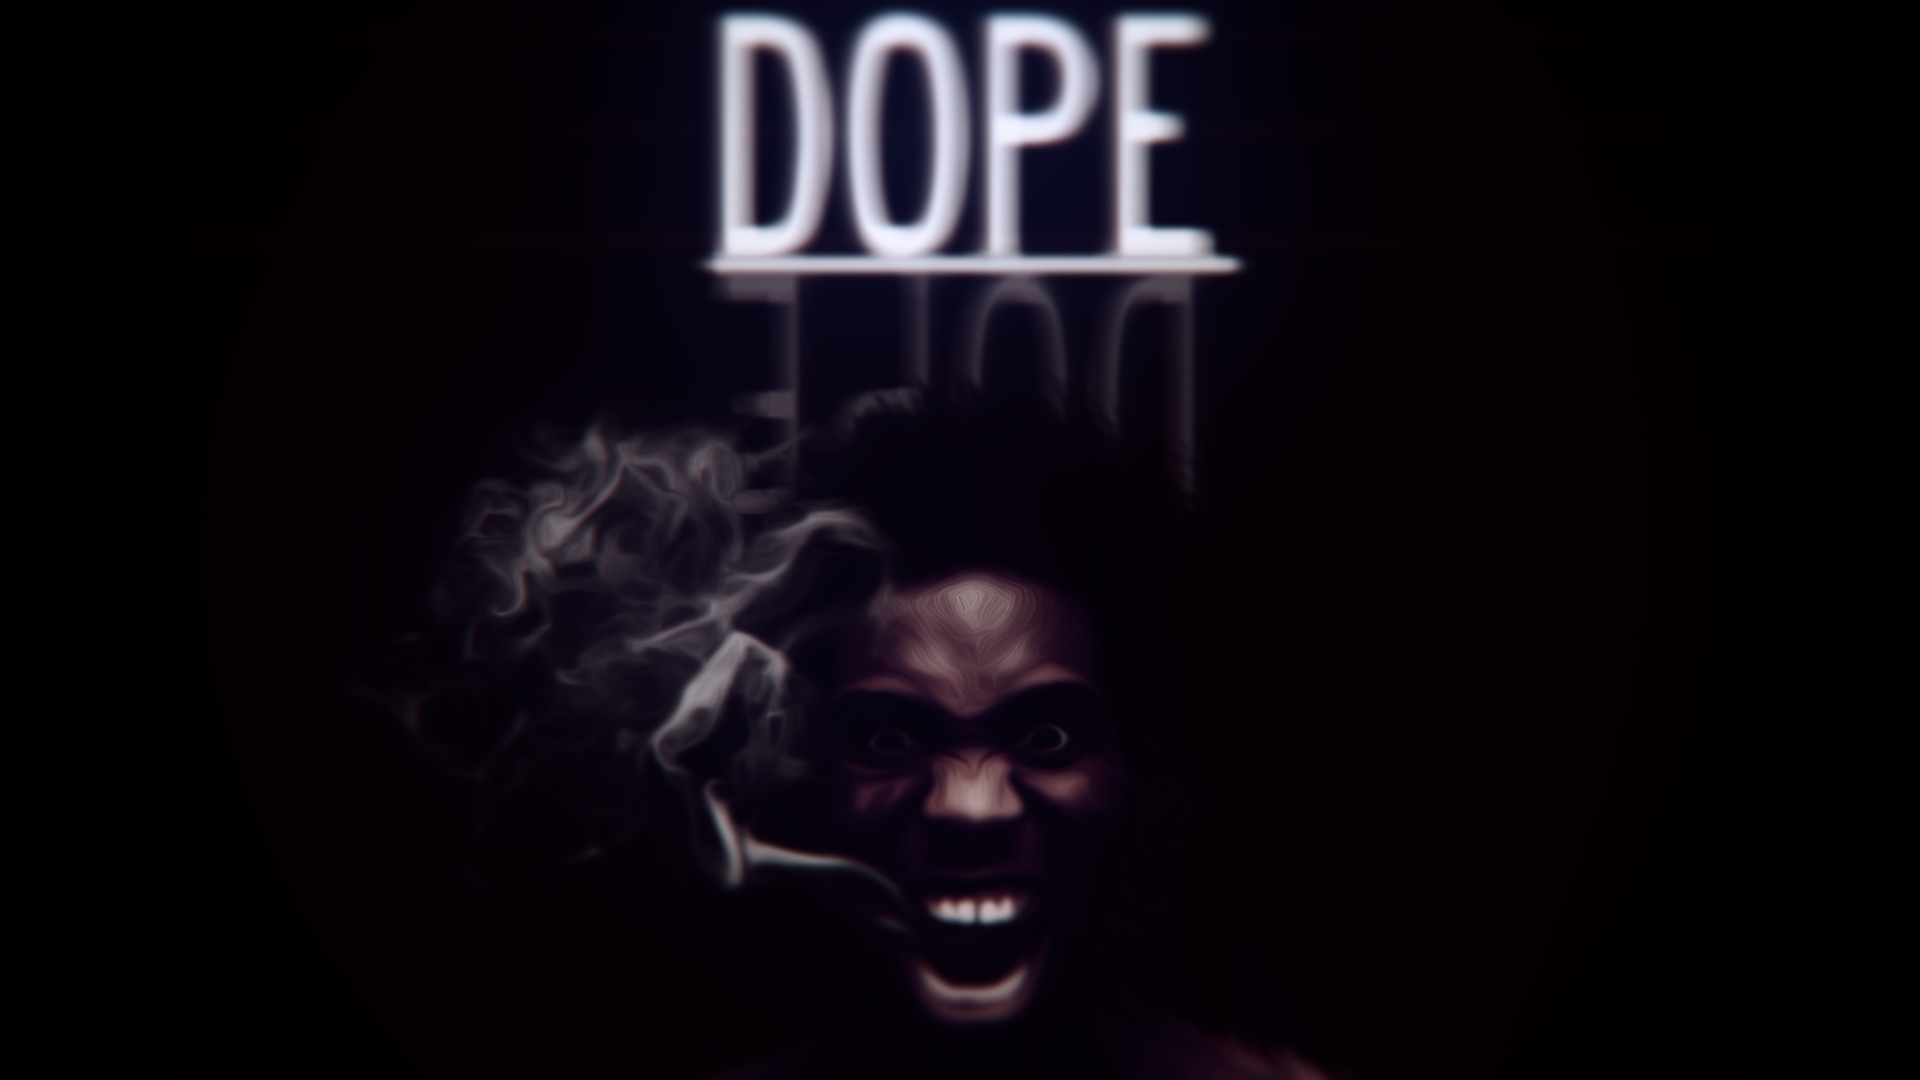  Dope  HD Wallpaper  Background Image 1920x1080 ID 